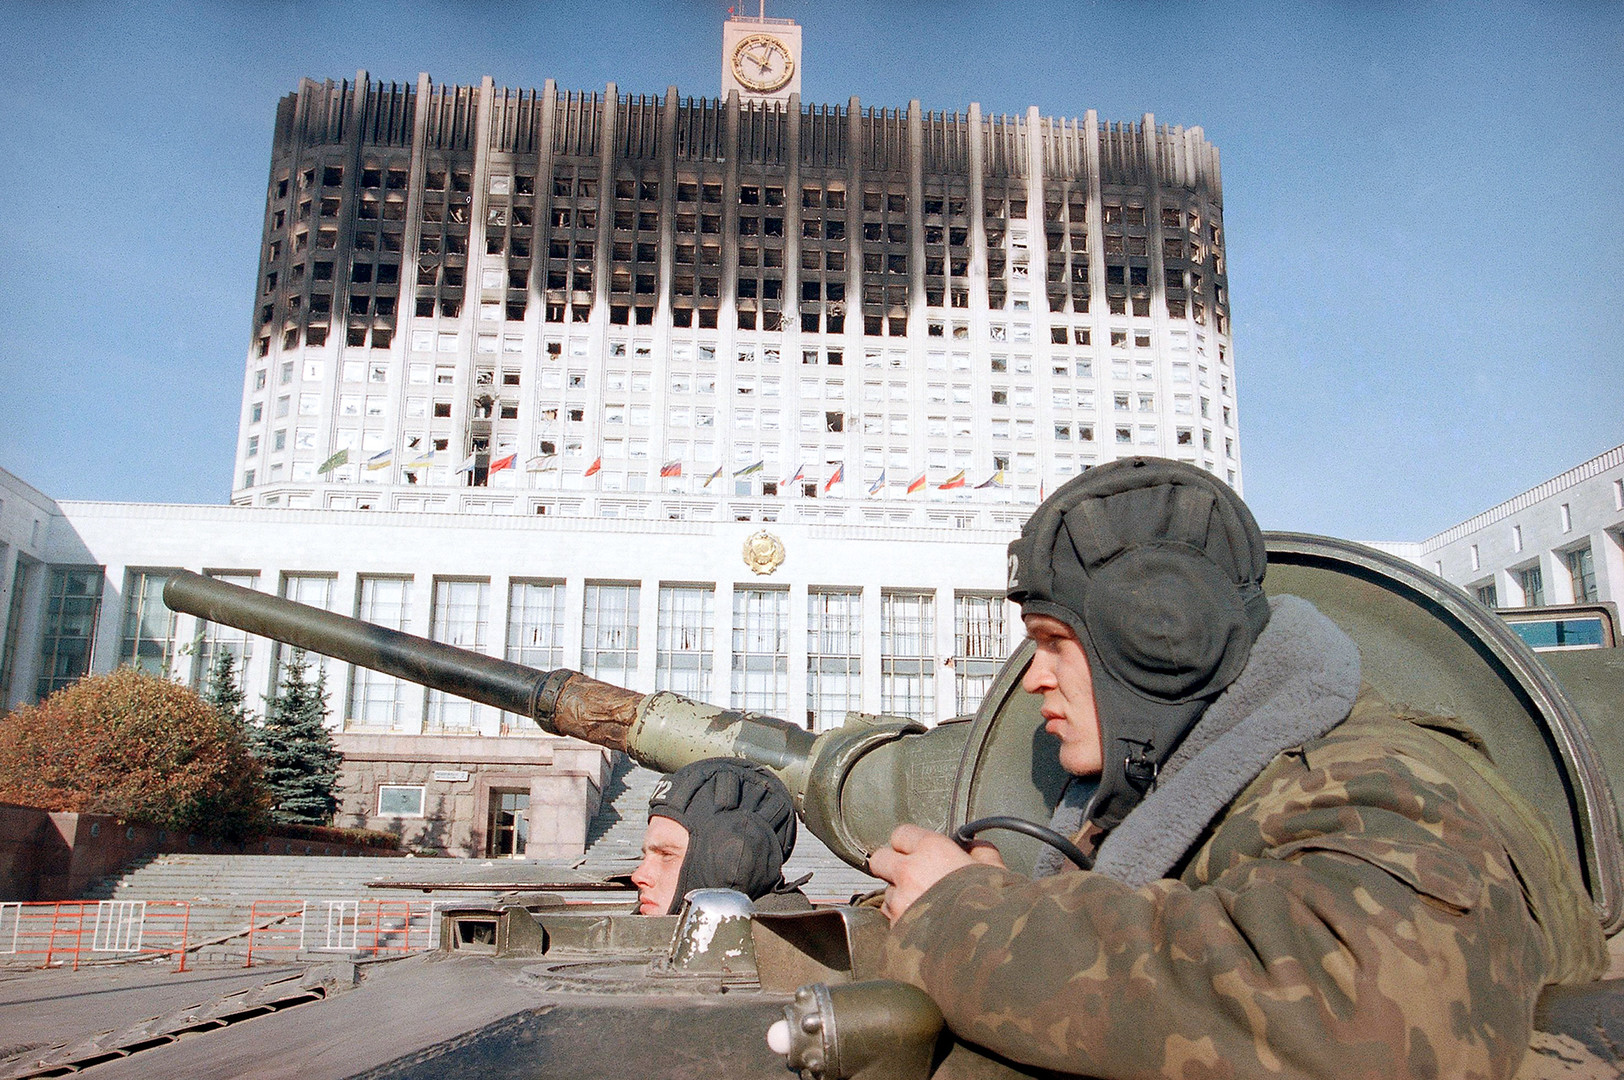 Russian  soldiers in a tank near the Russian parliament building in Moscow on Wednesday, Oct. 6, 1993.